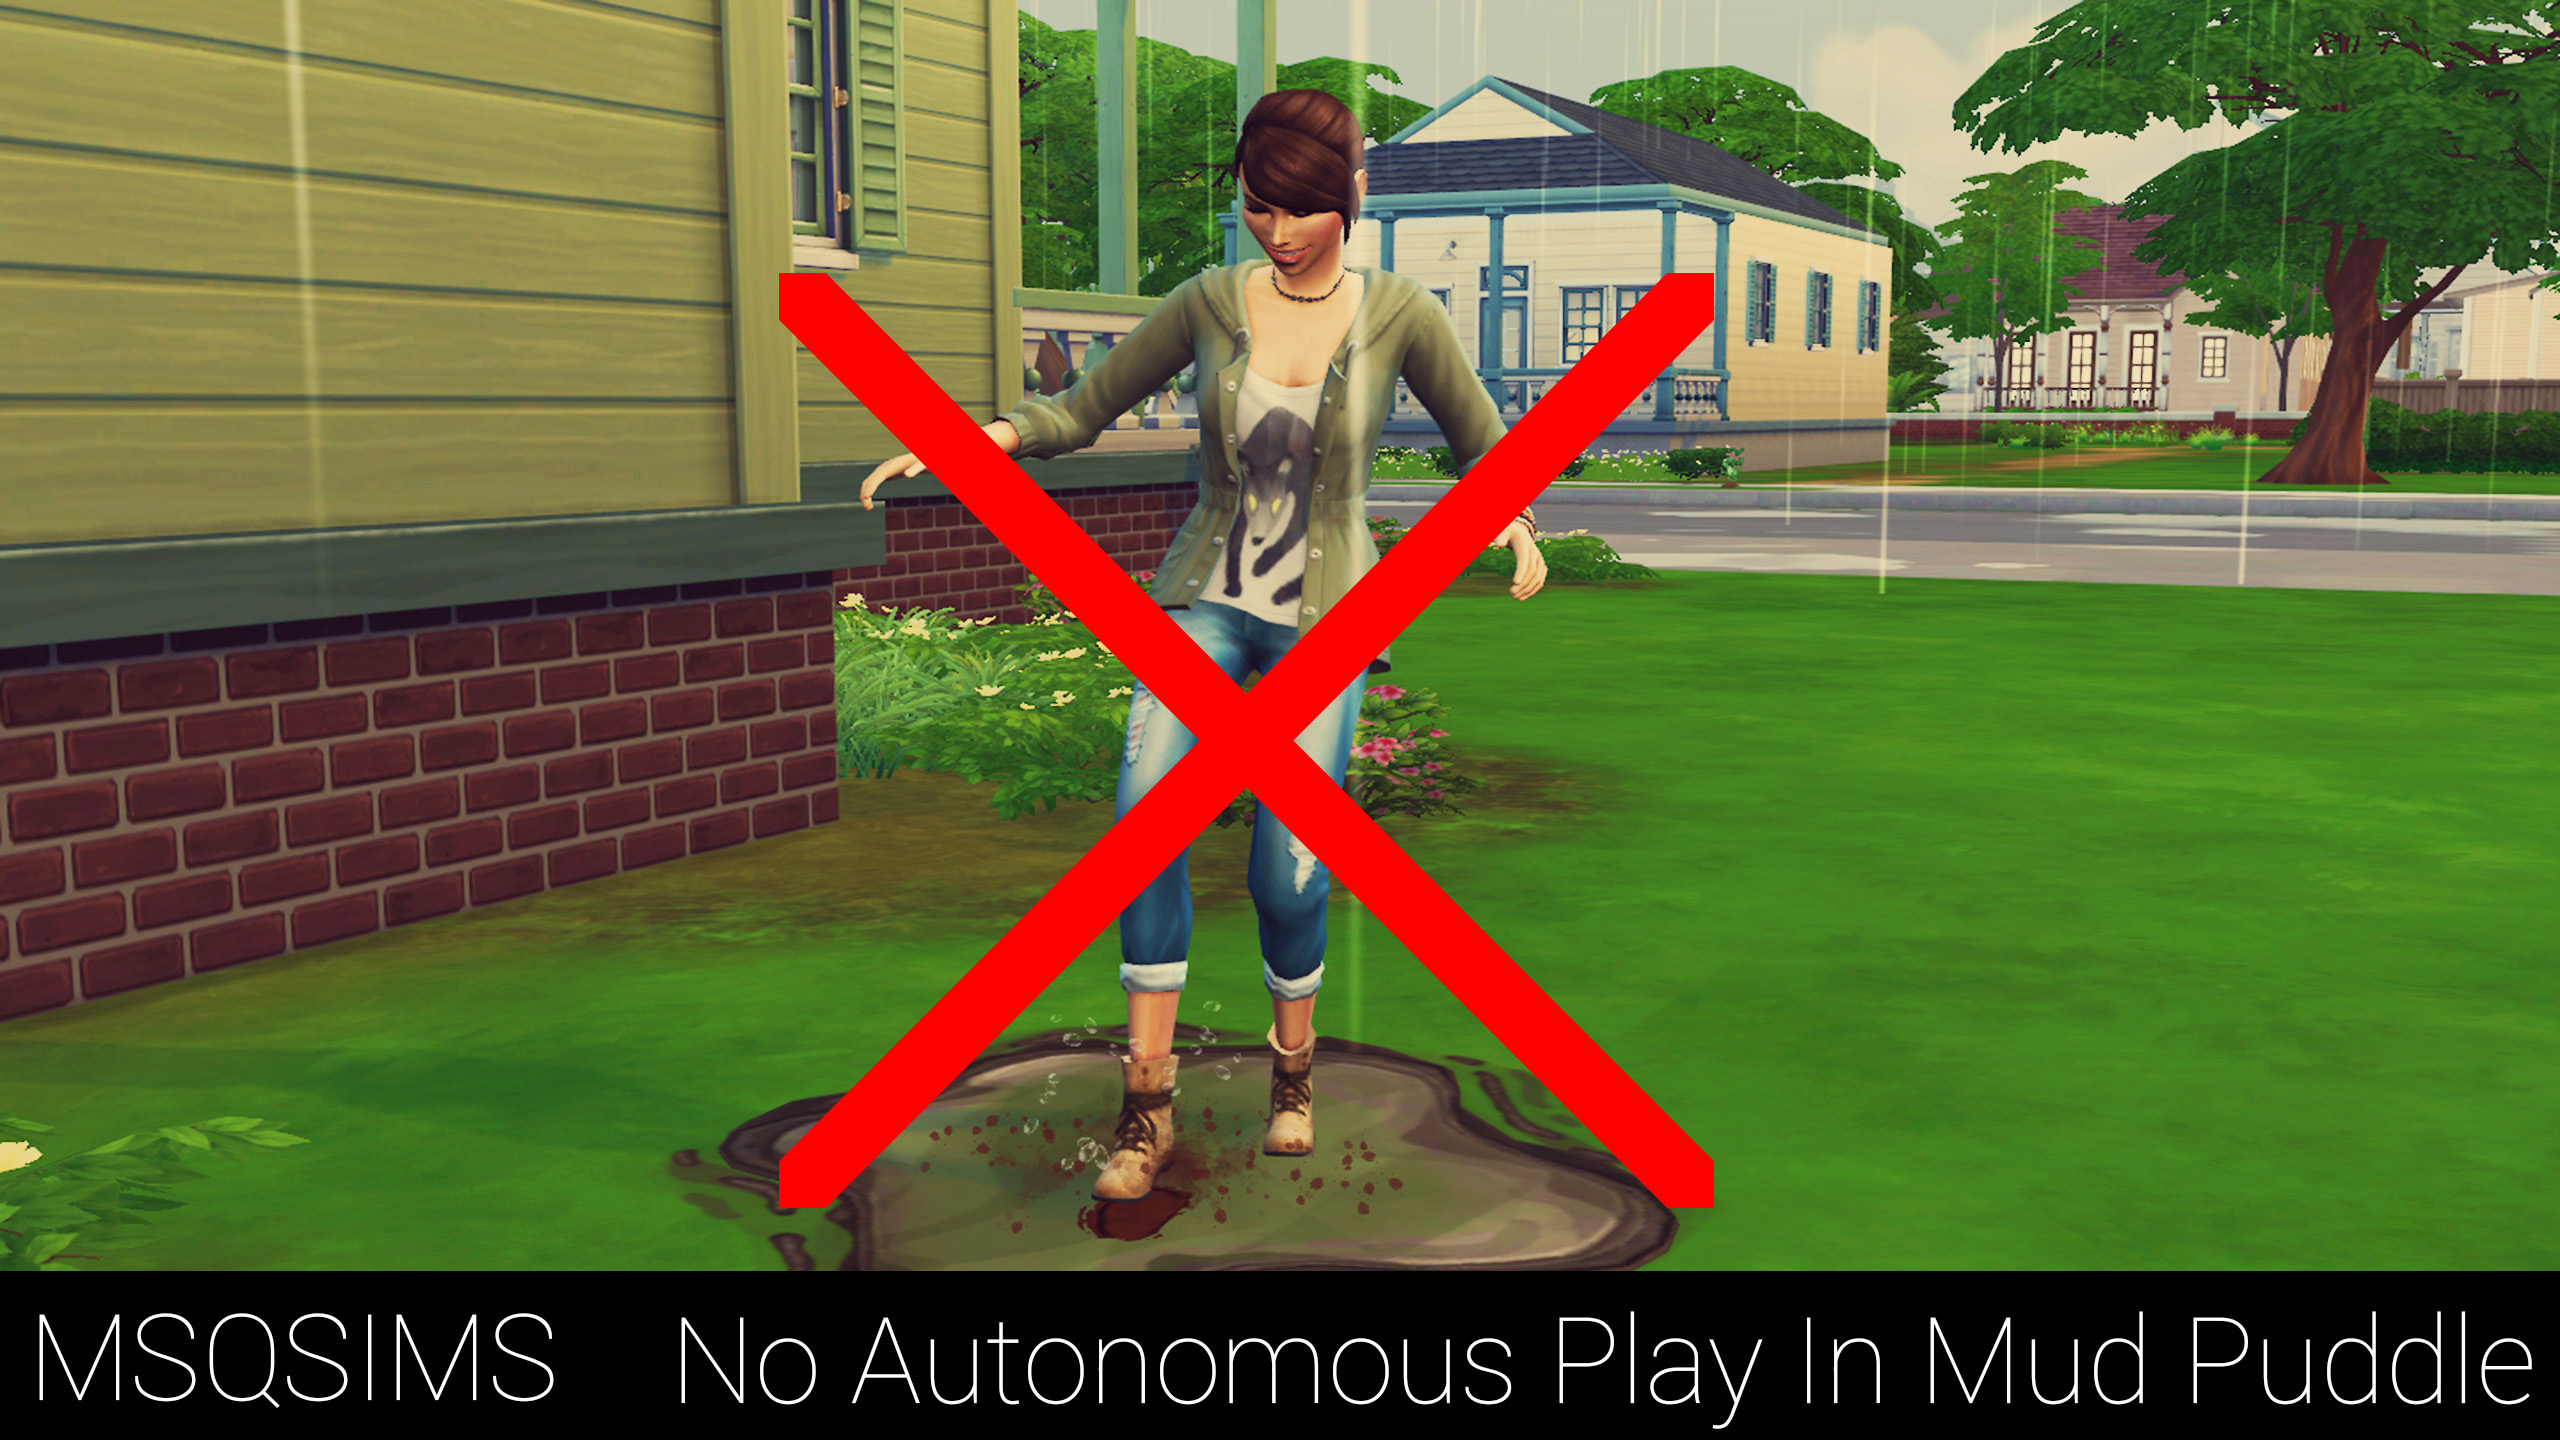 No Autonomous Play In Mud Puddle The Sims 4 Catalog